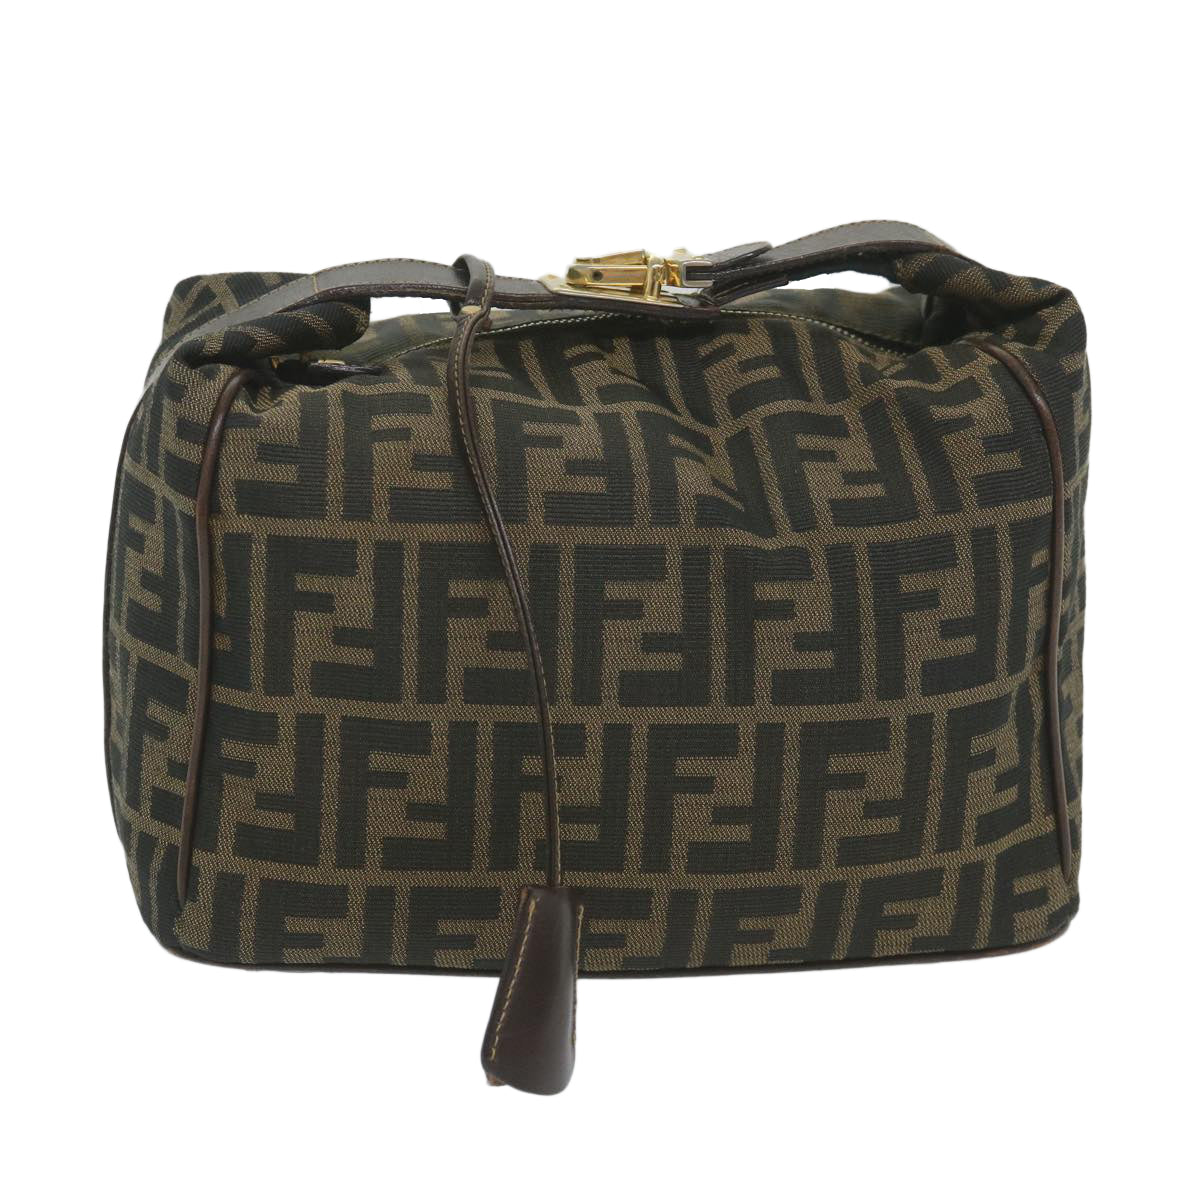 FENDI Zucca Canvas Vanity Cosmetic Pouch Black Brown Auth 59689